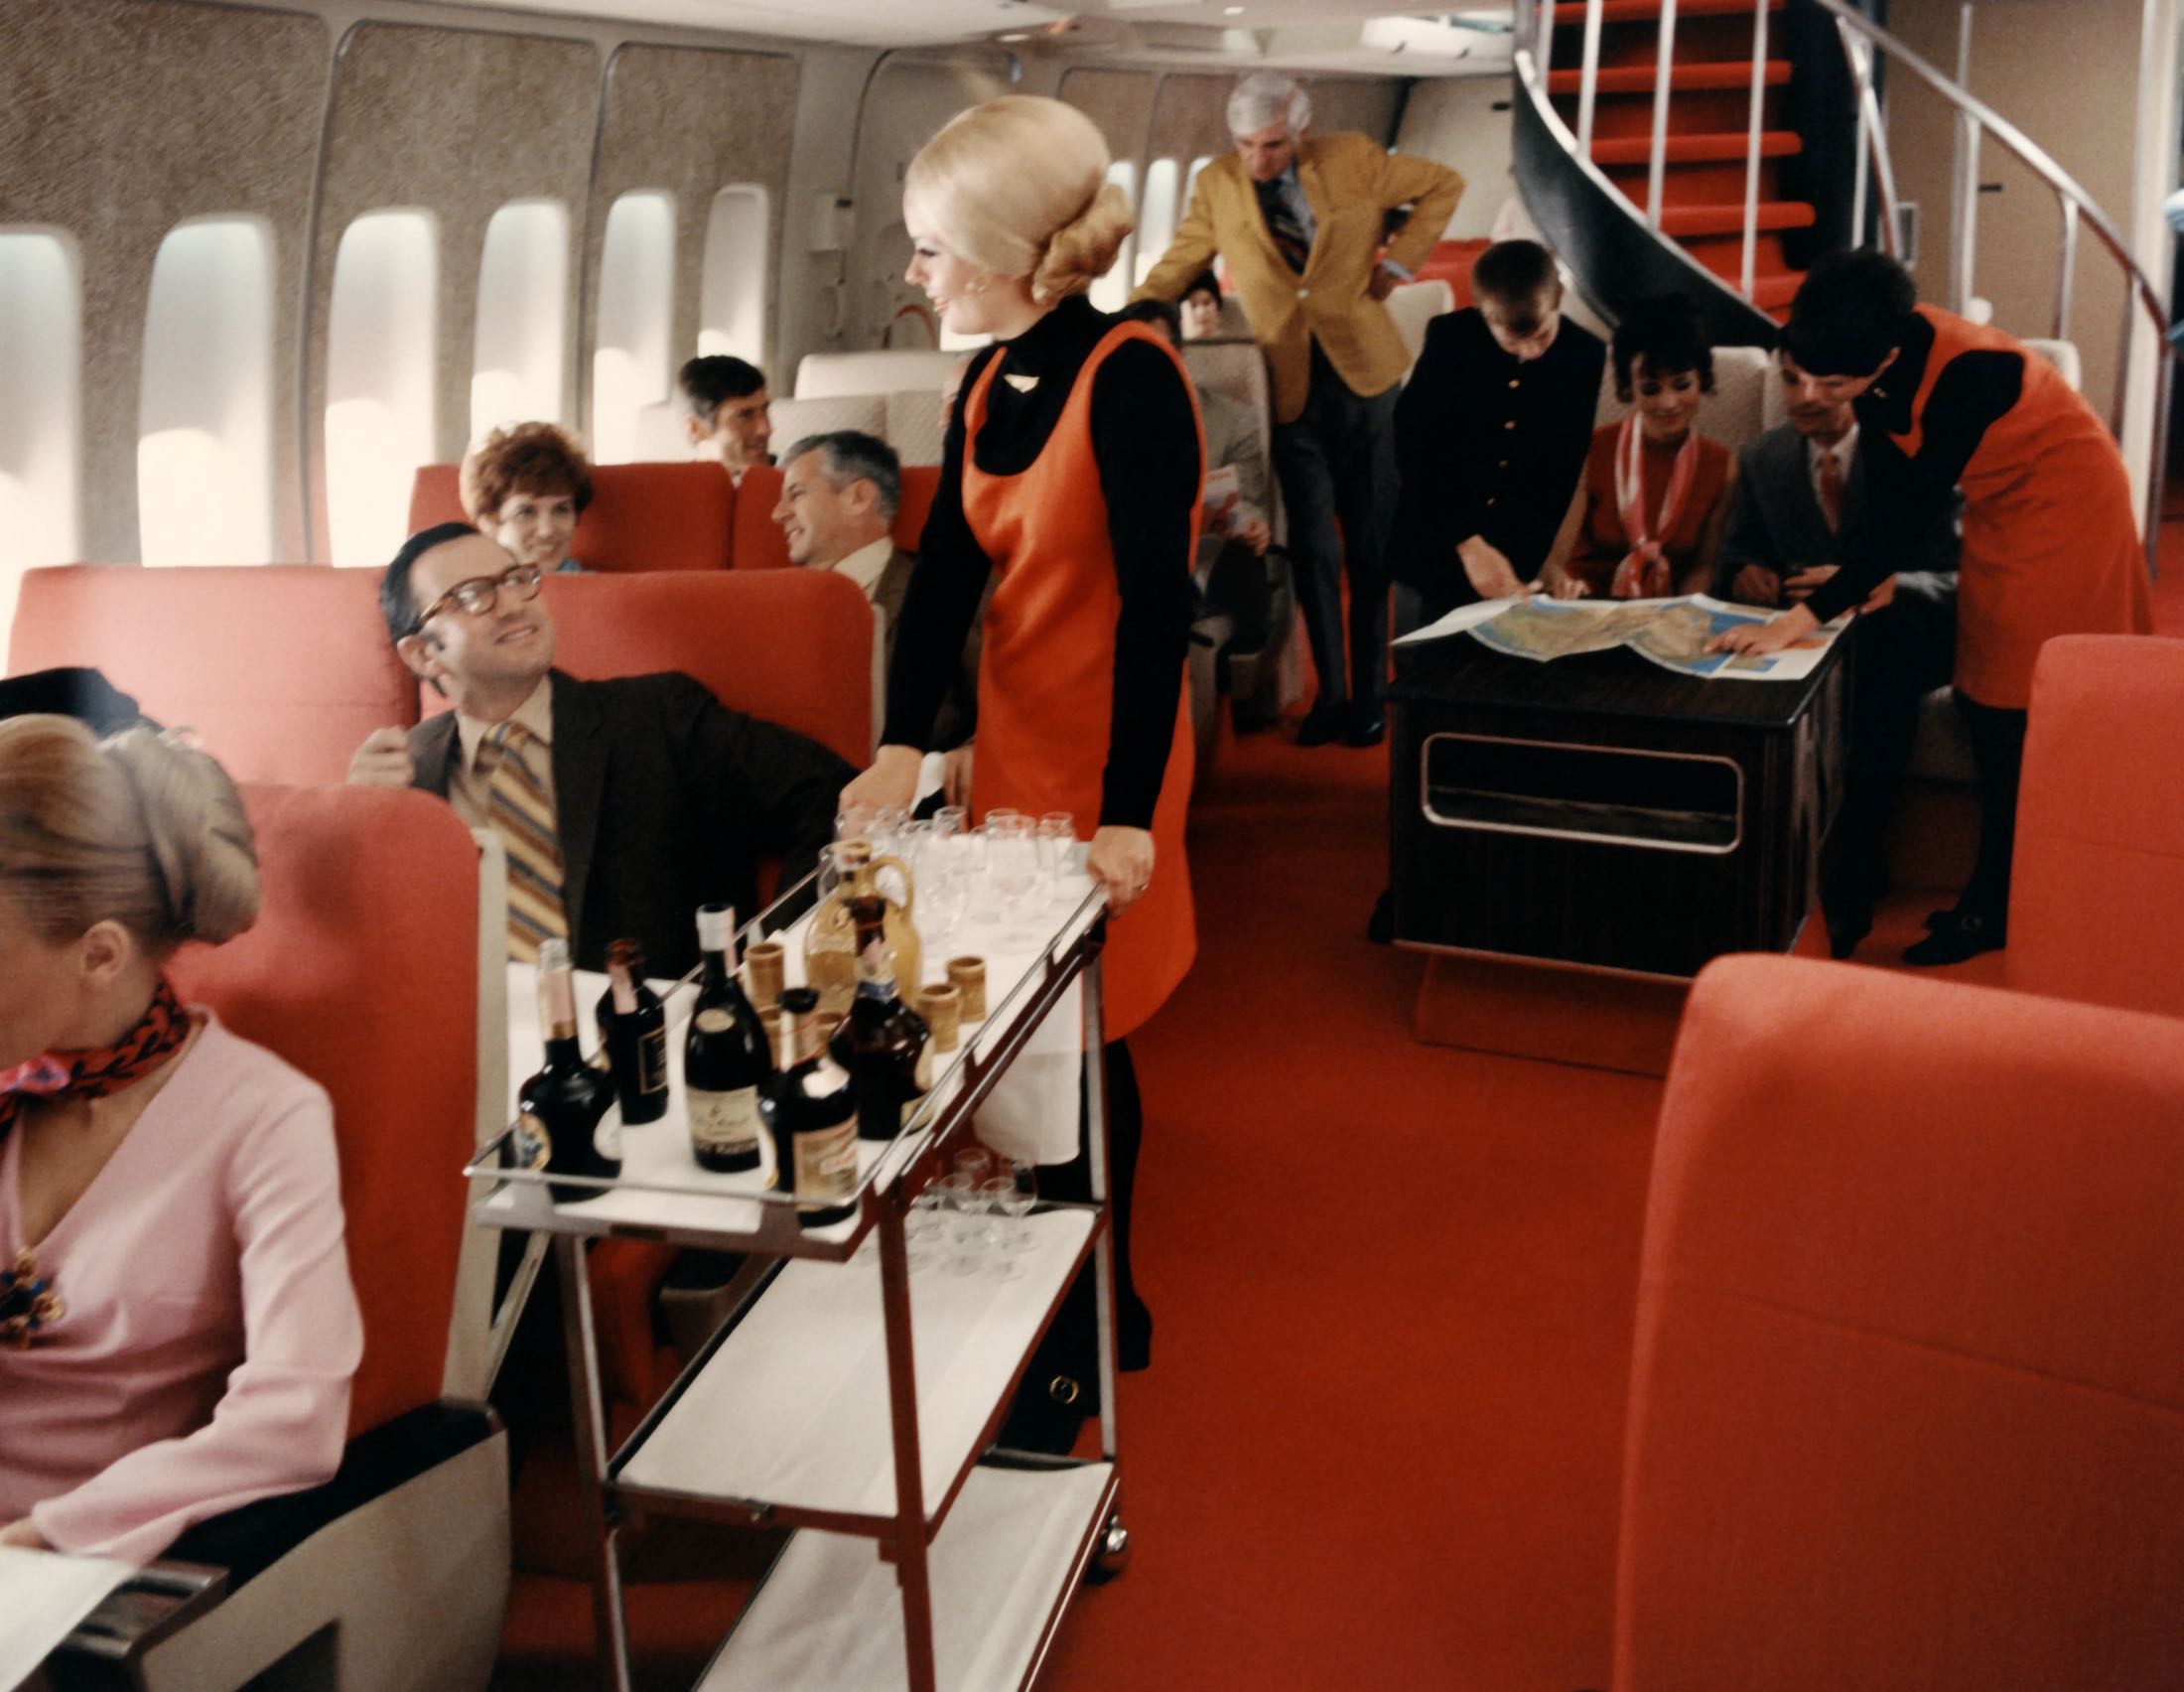 a woman serving drinks on a cart in an airplane